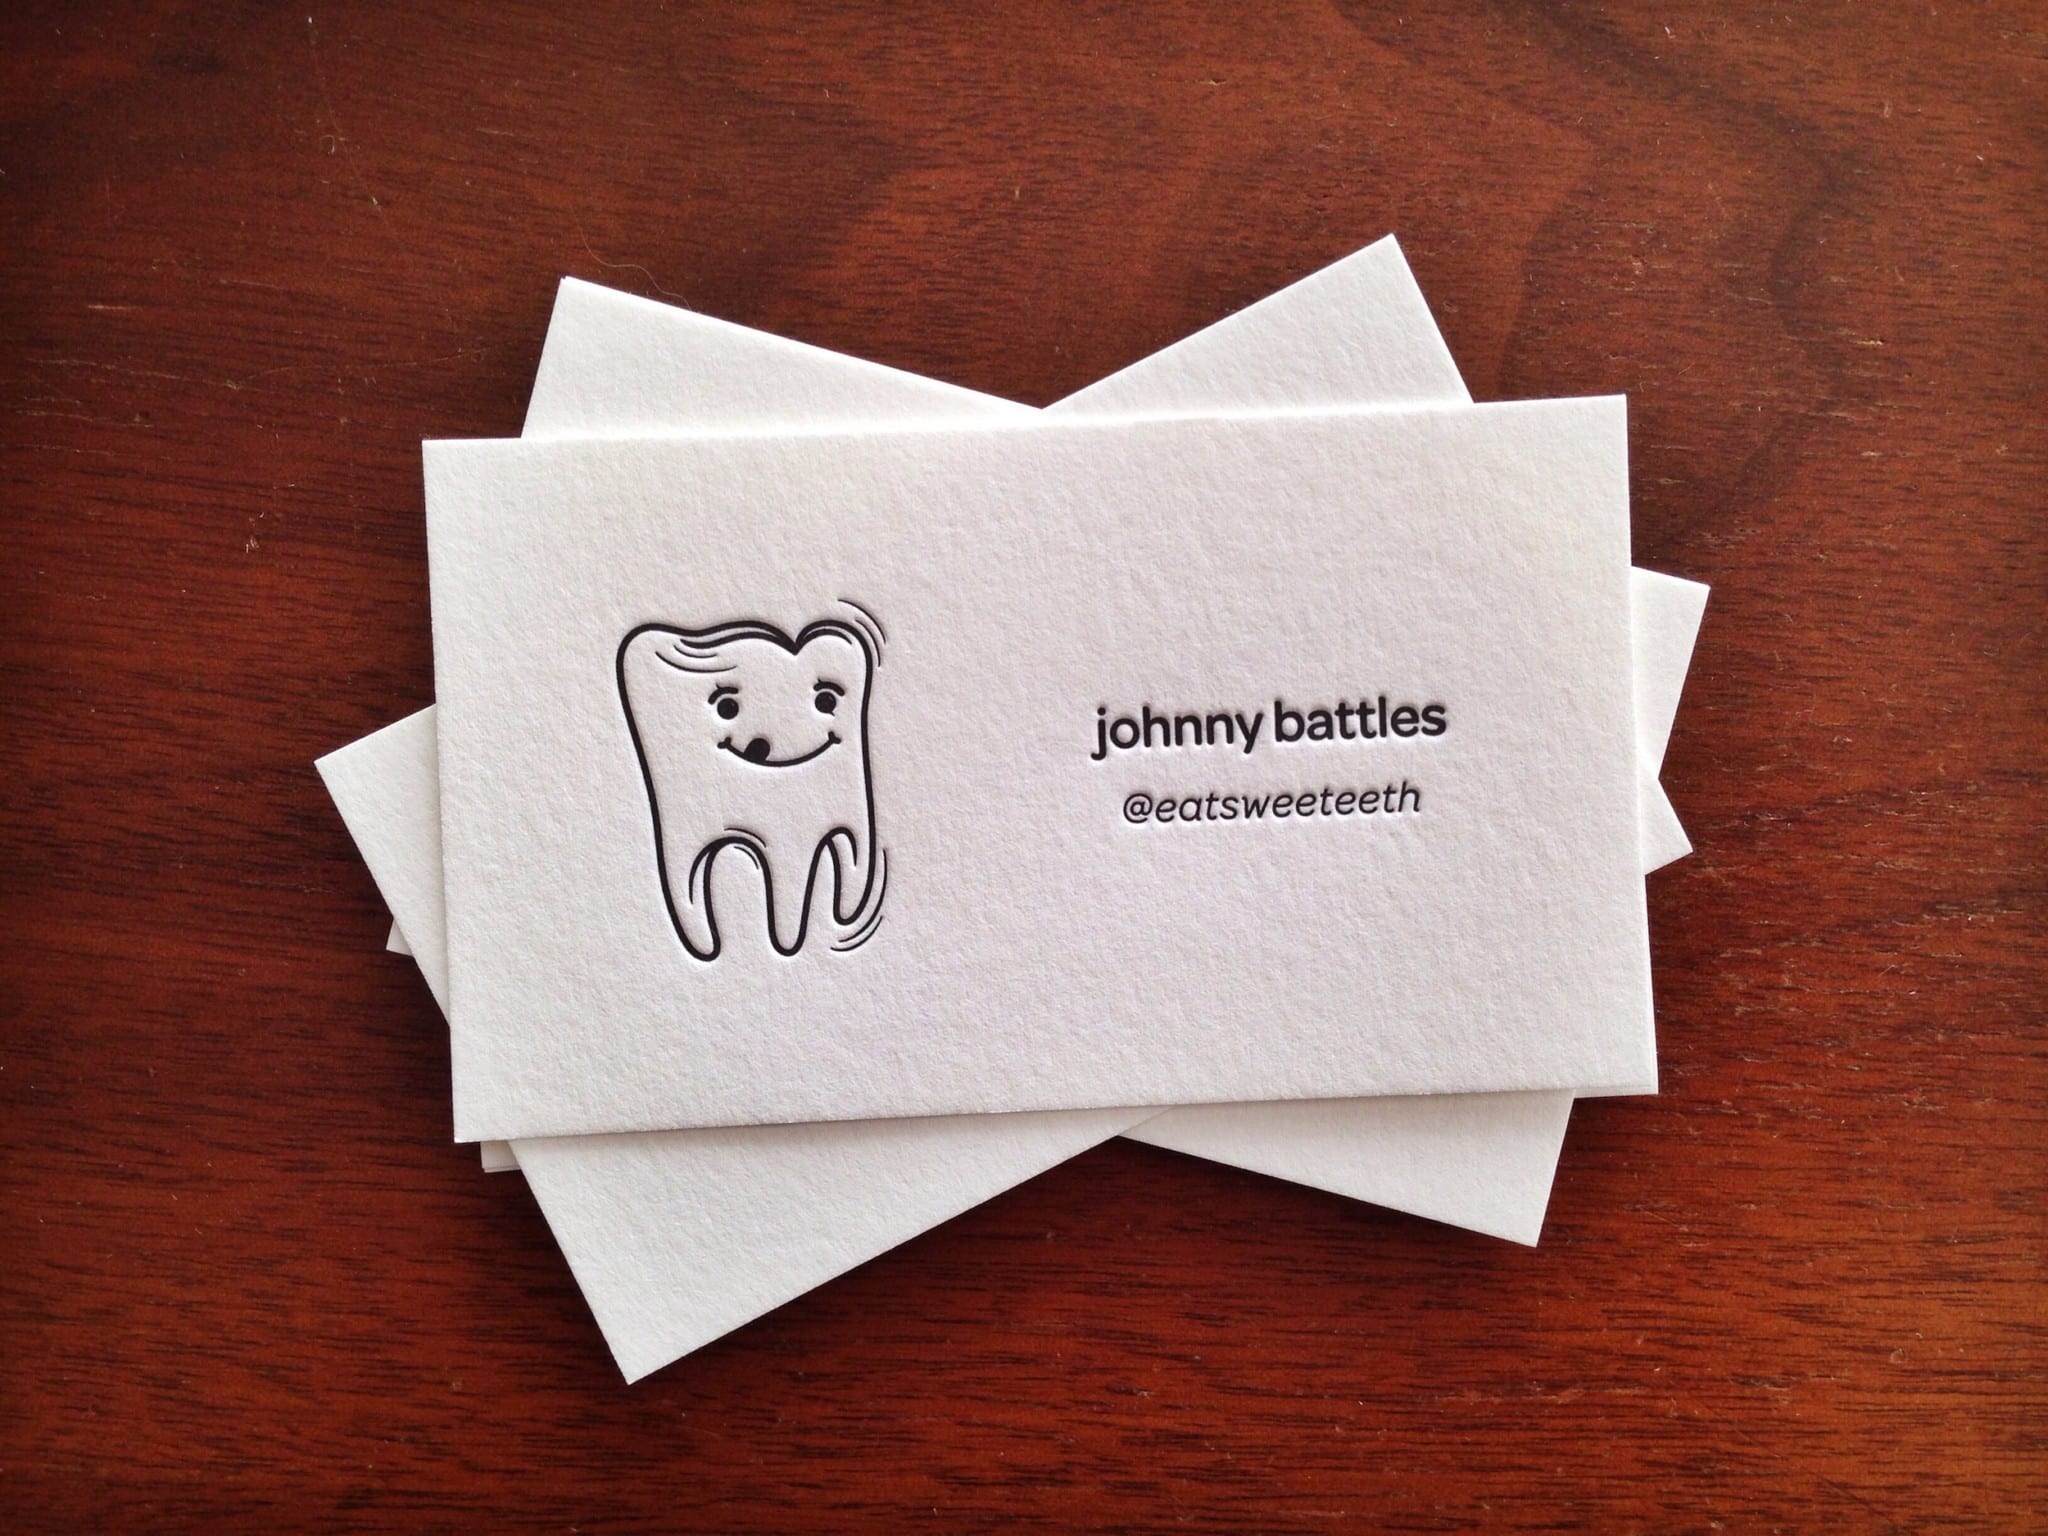 Sweeteeth Letterpress Business Cards | printed by INK MEETS PAPER